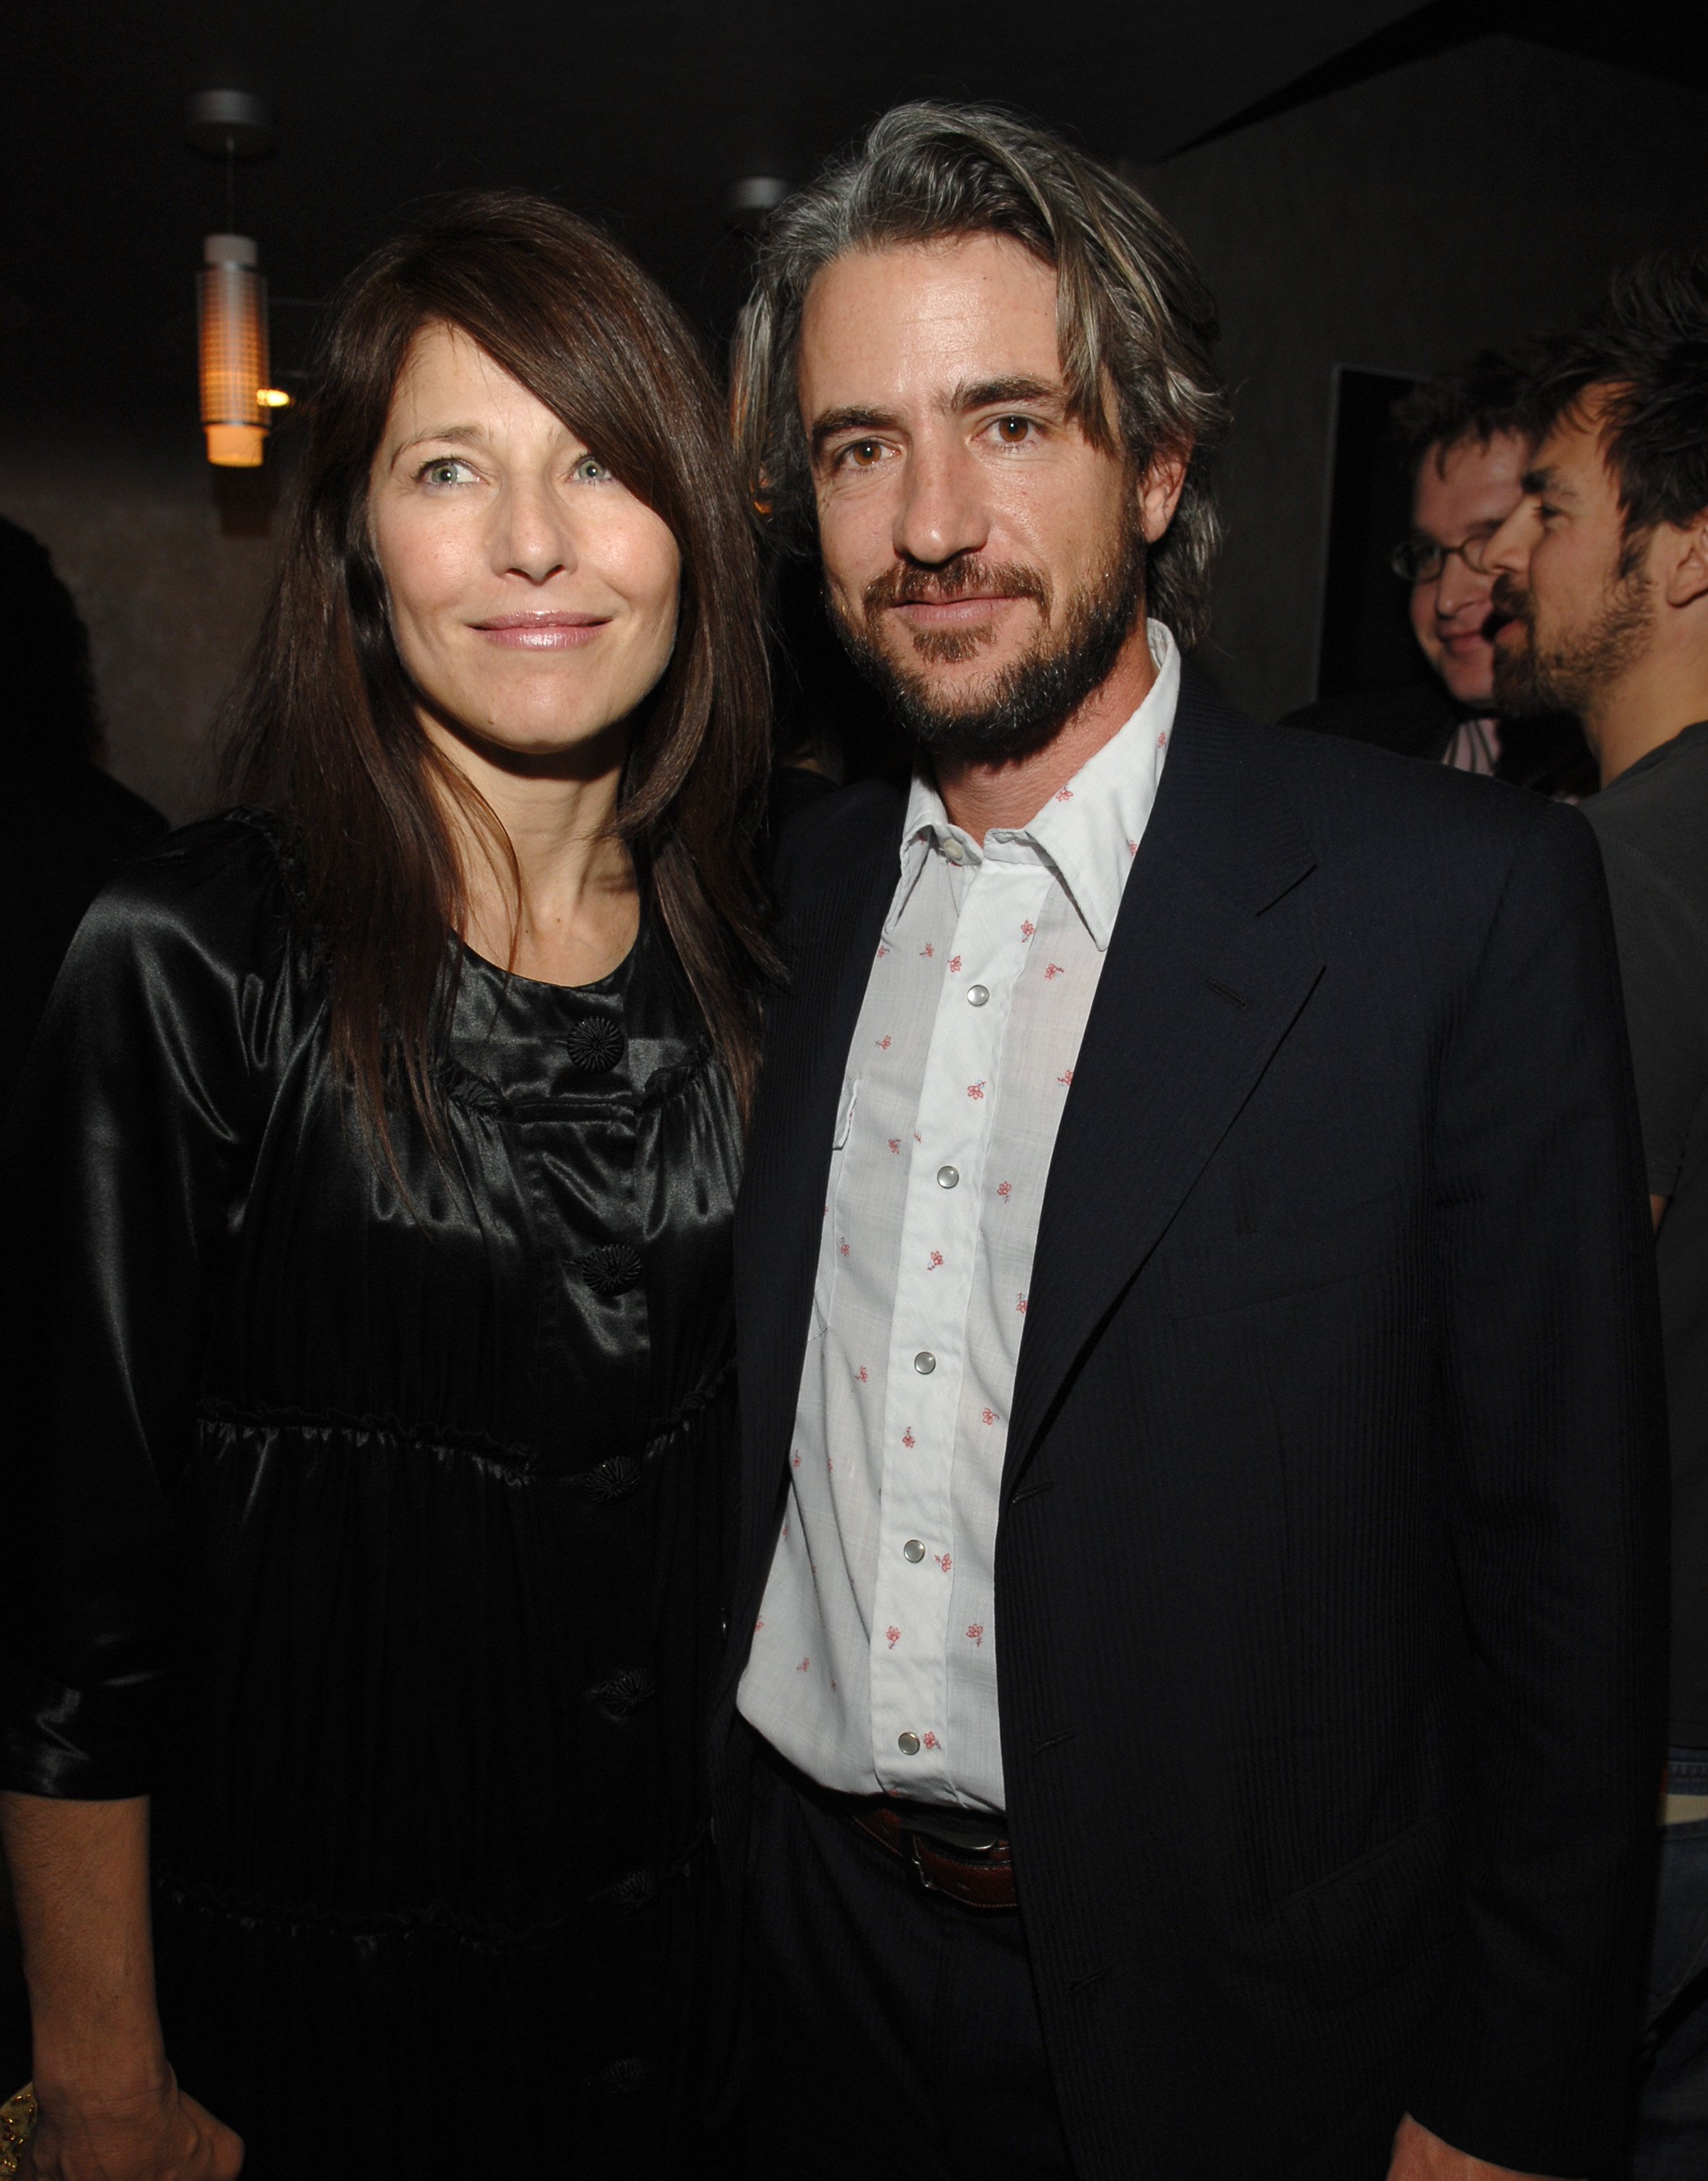 Catherine Keener and Dermot Mulroney | Source: Getty Images